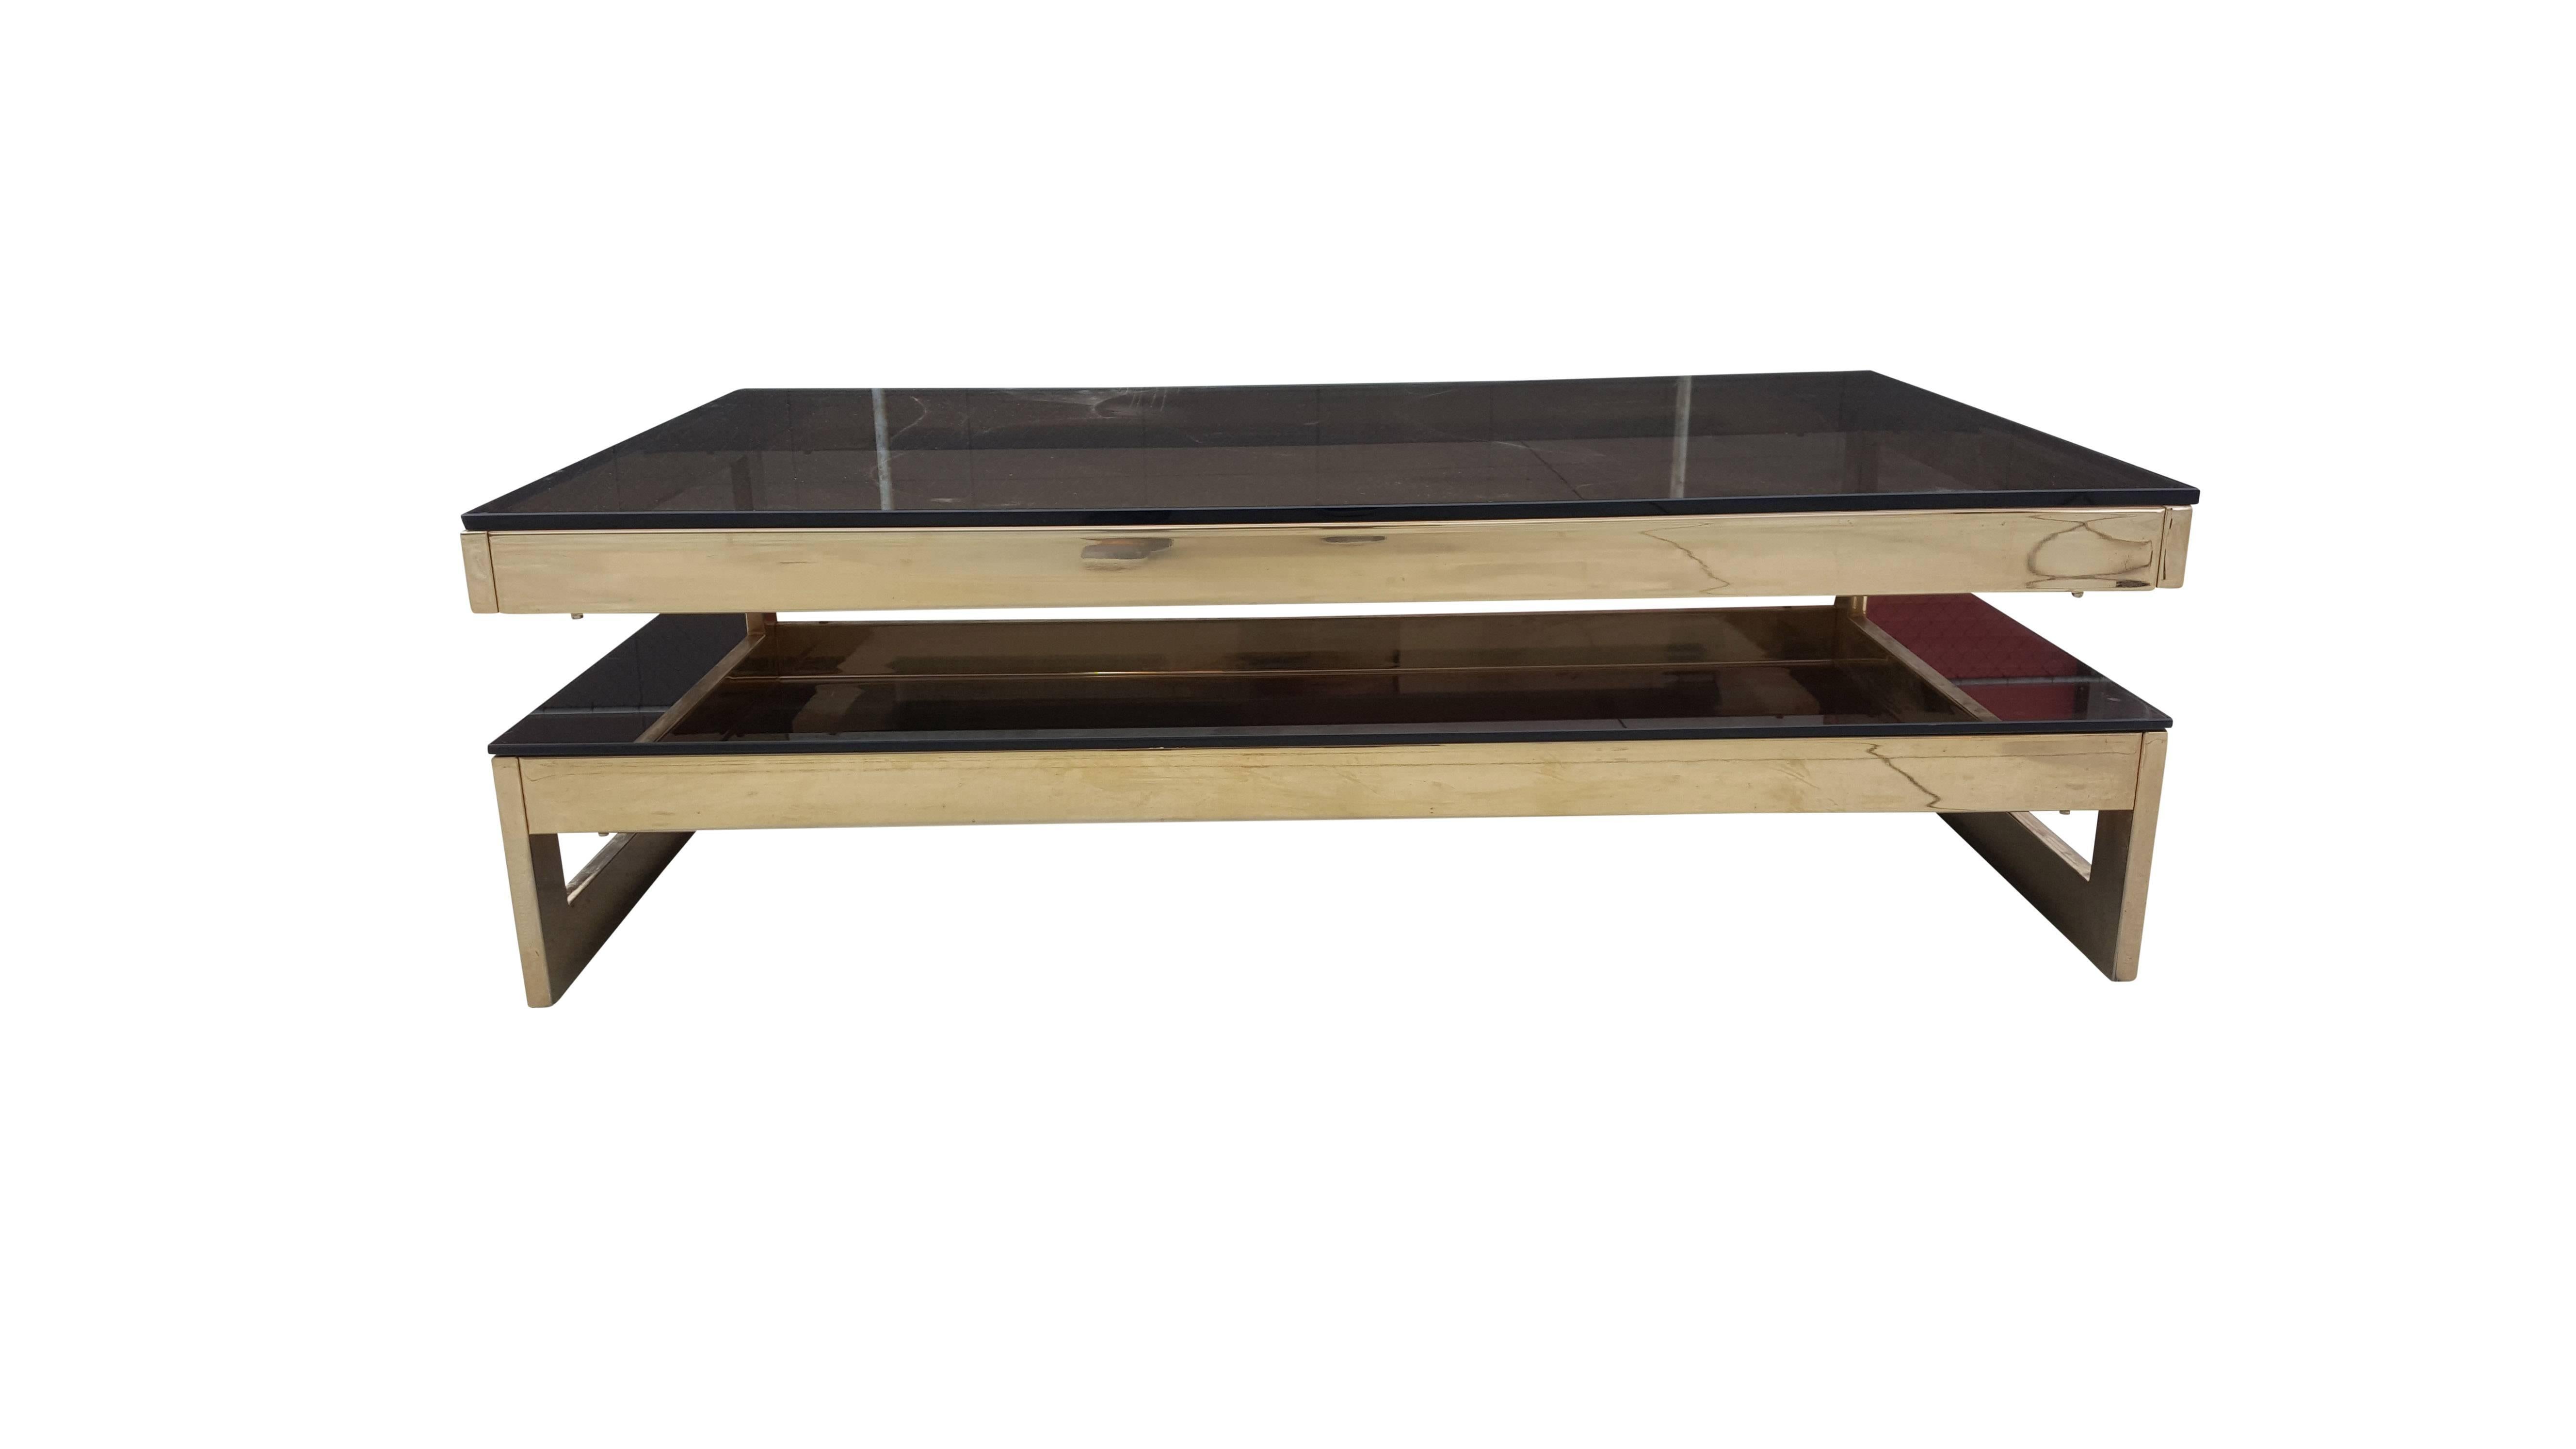 G-Shaped, Gold-Plated Coffee Table by Belgo Chrome (Hollywood Regency) im Angebot